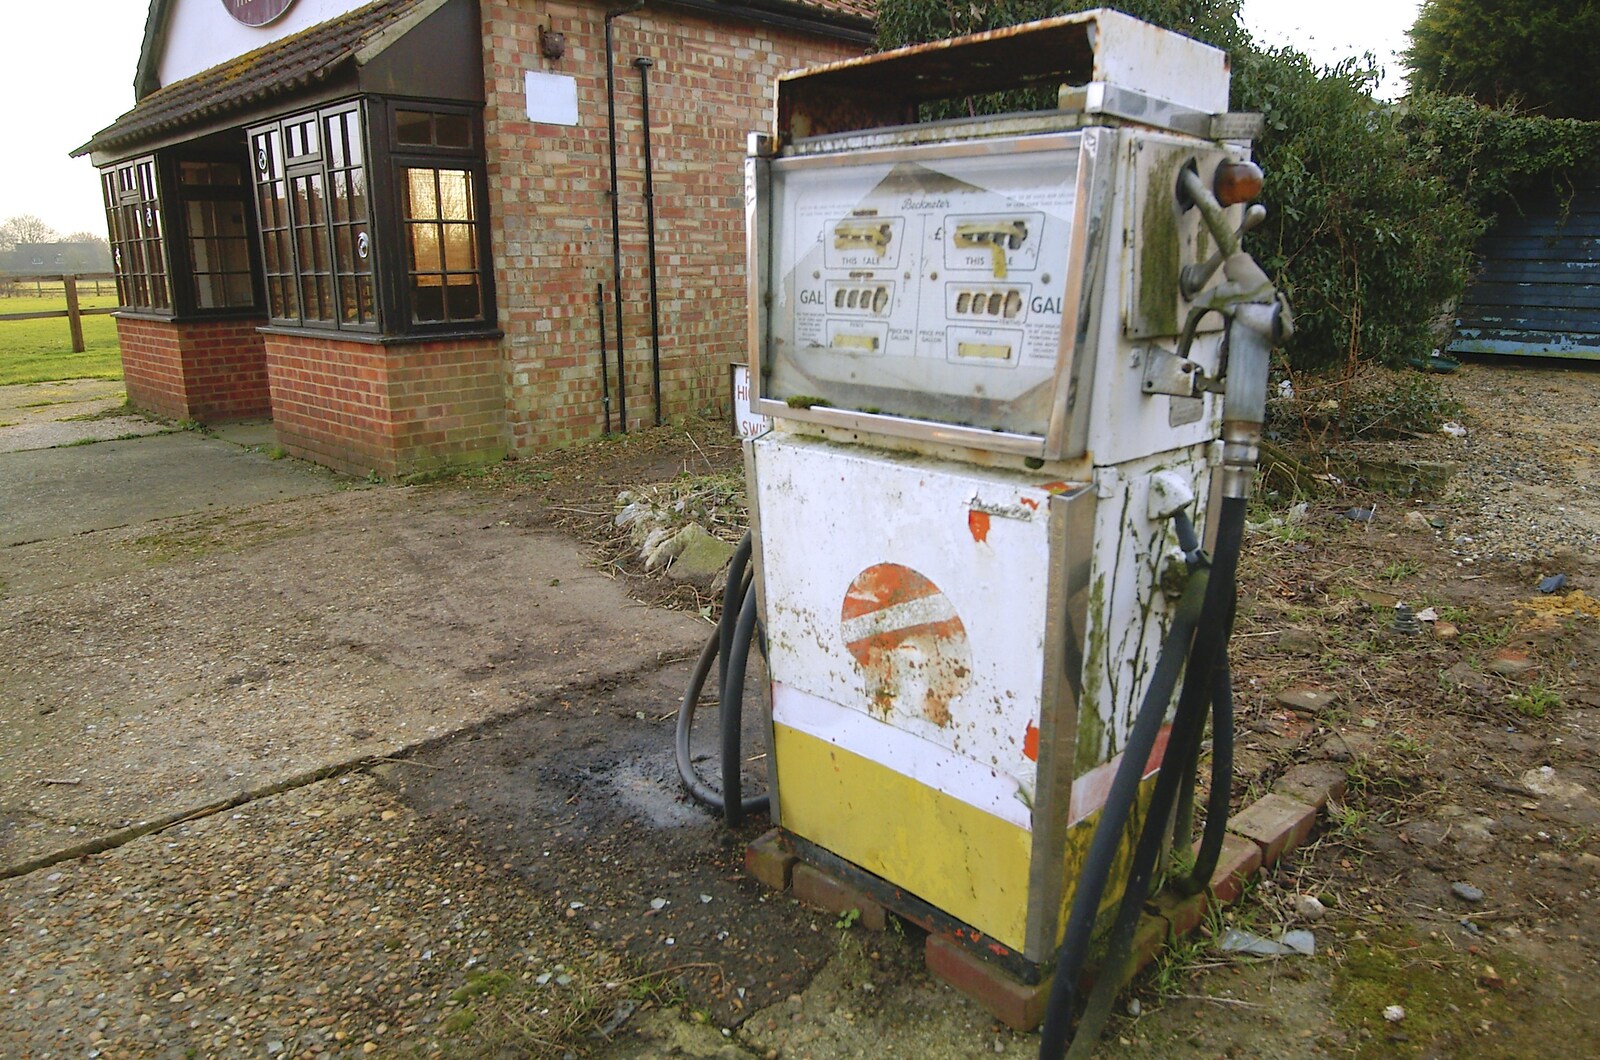 An epic ancient petrol pump in Grimston, Norfolk from Dom in da Chapel, Safeway Chickens and Evil Supermarkets, Harleston and Grimston - 15th January 2006